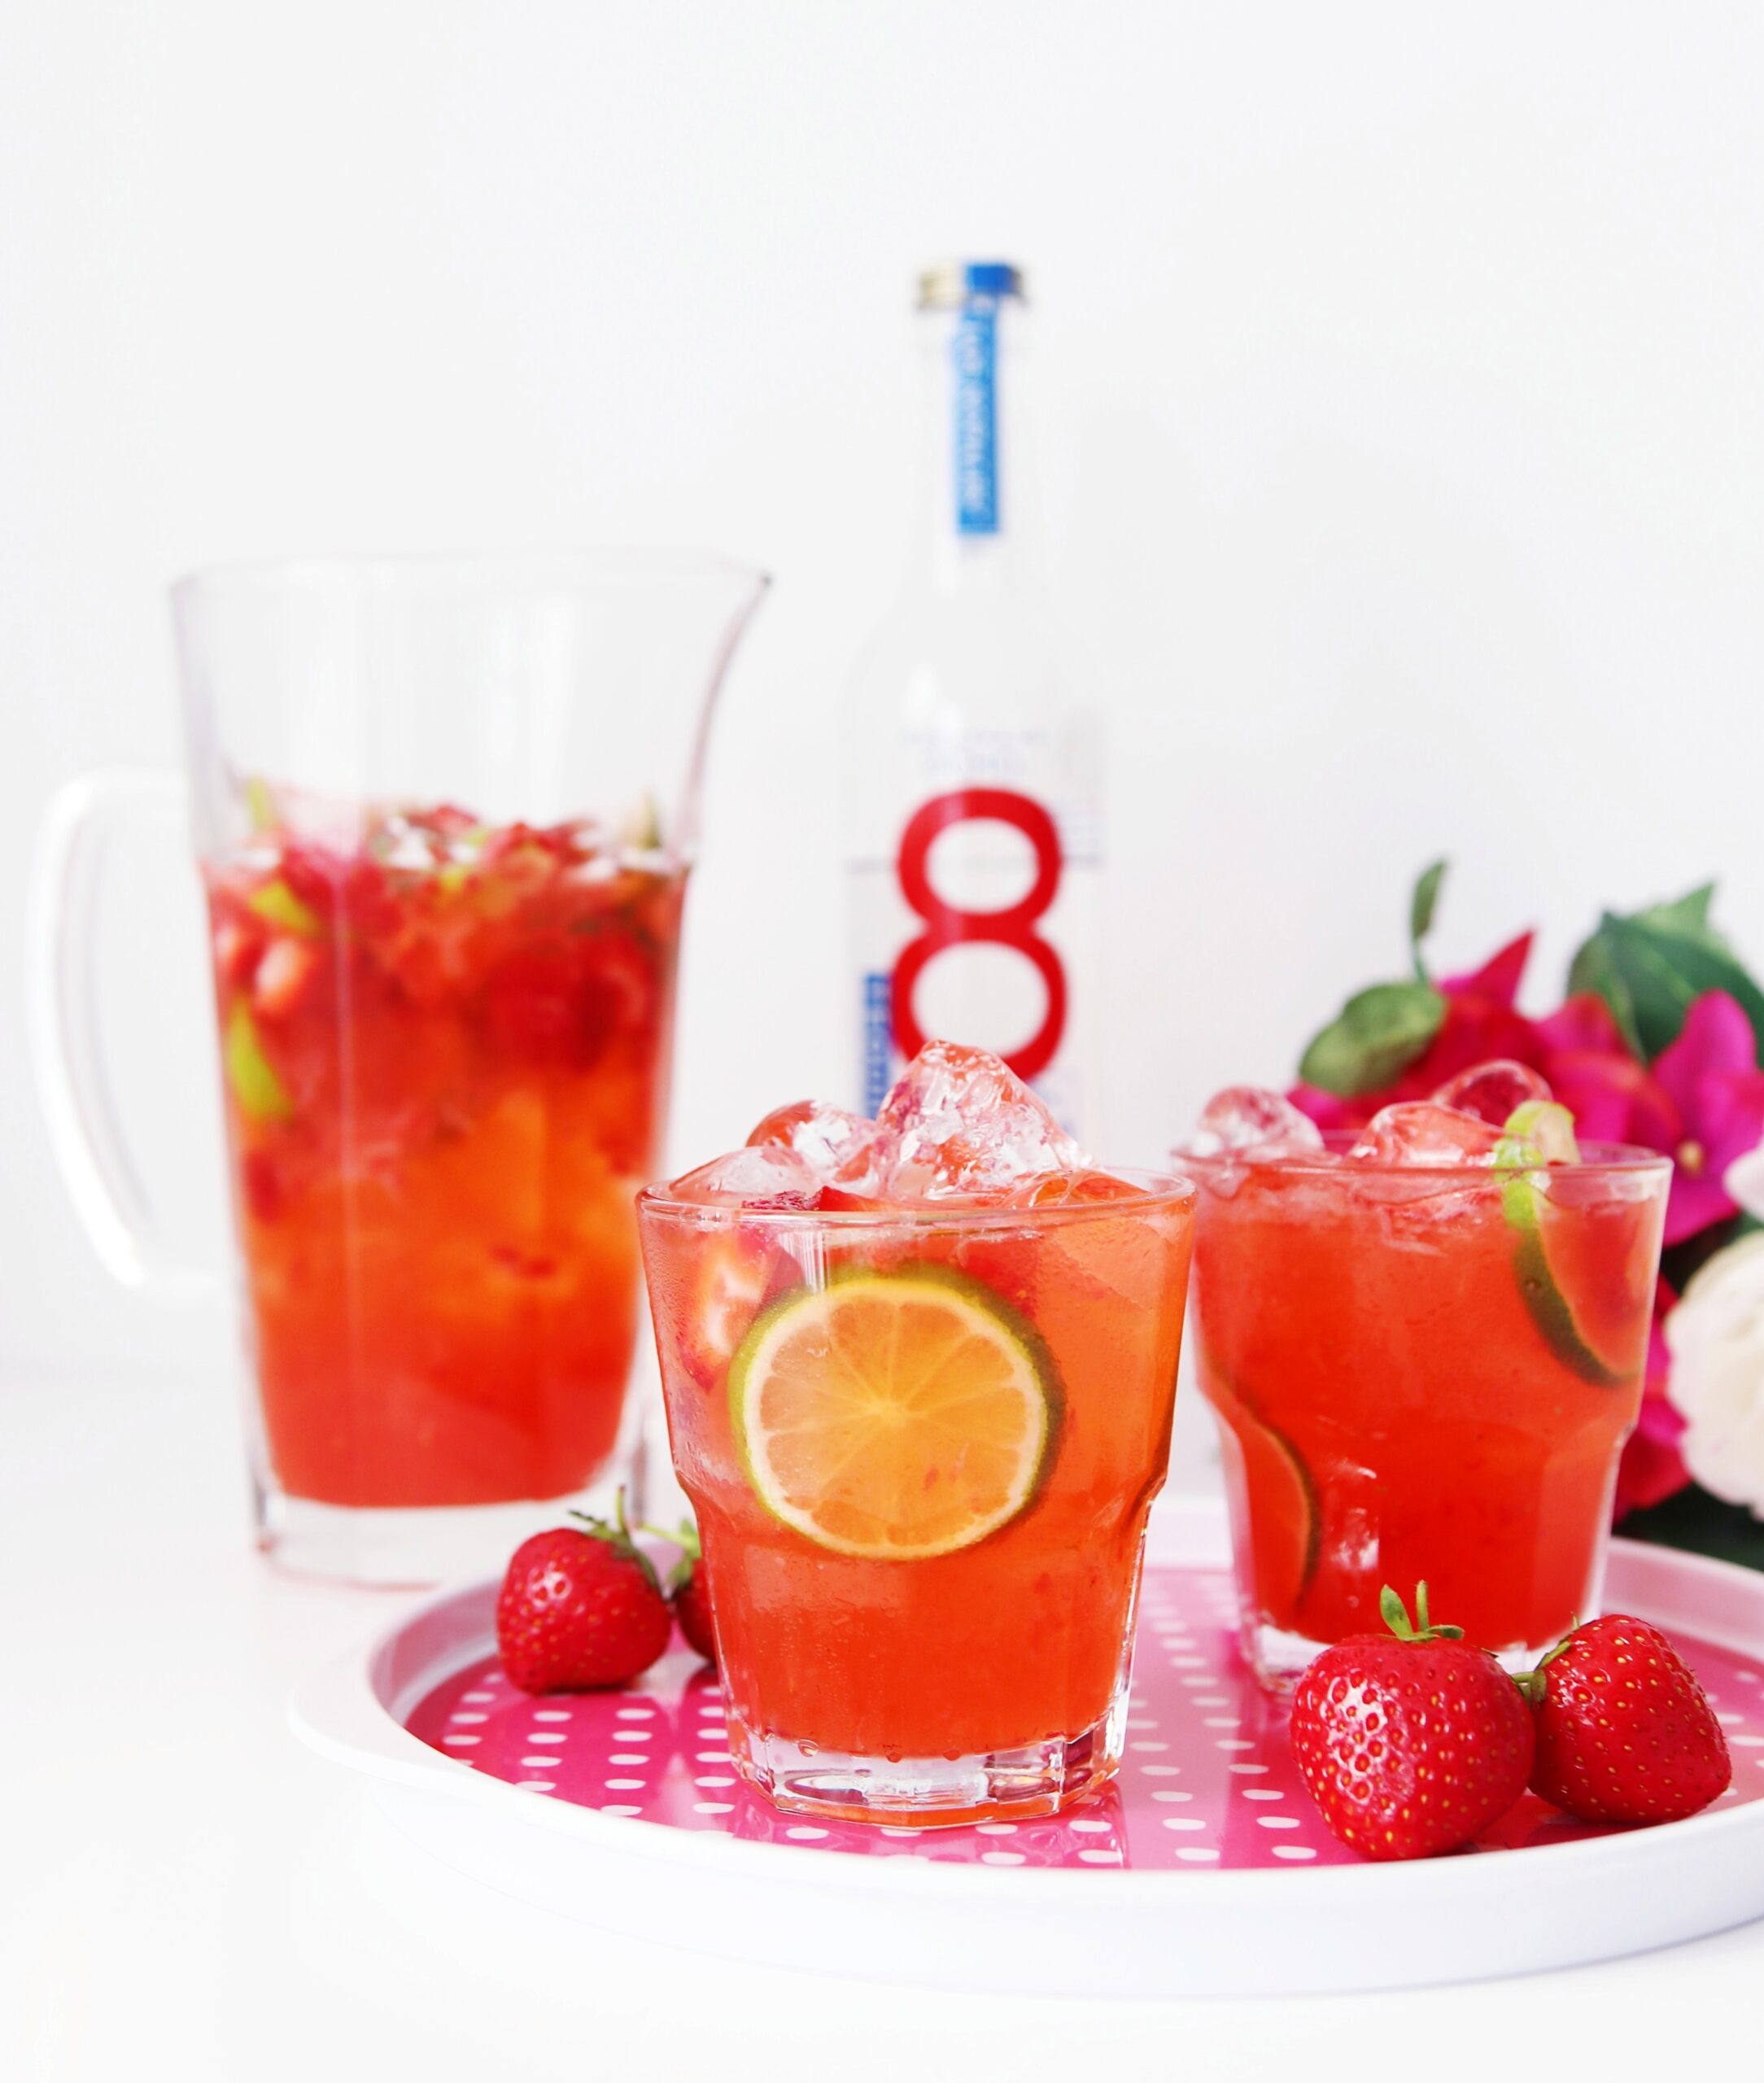 Strawberry Tequila Refresher Cocktail - Tequila Cocktail Recipe